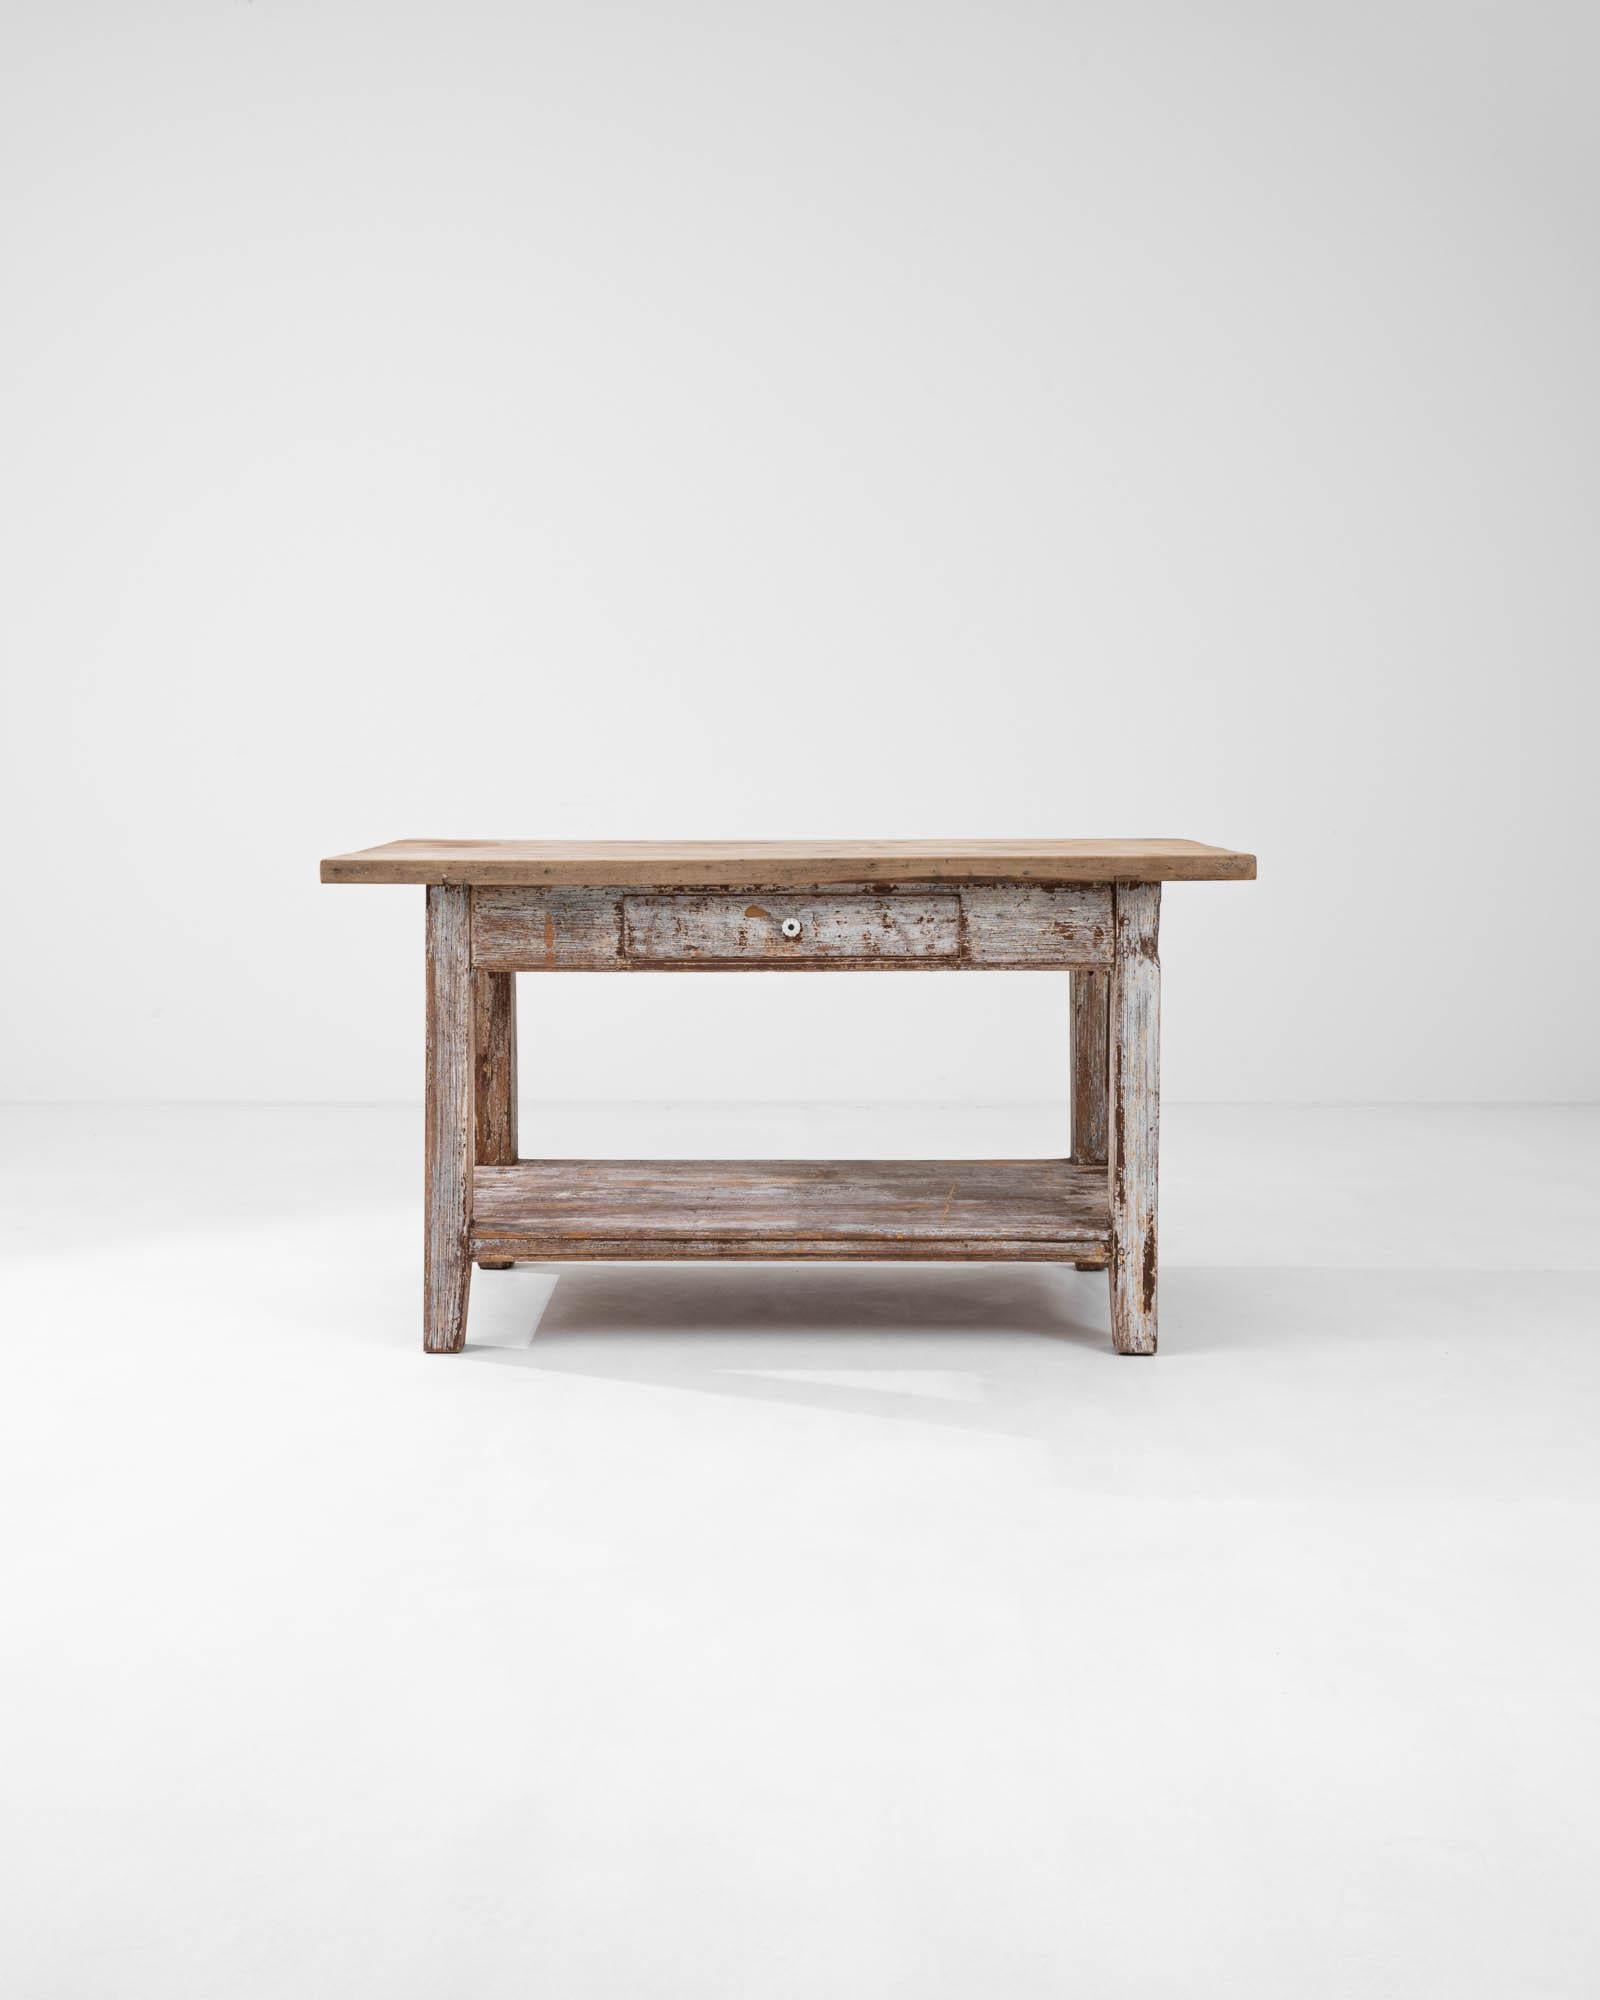 The simple, hard-wearing form of this vintage provincial side table has a timeless appeal. Hand-built in France in the early 20th century, a tabletop of thick wooden boards sits atop a sturdy frame. A lower storage platform and a small drawer set